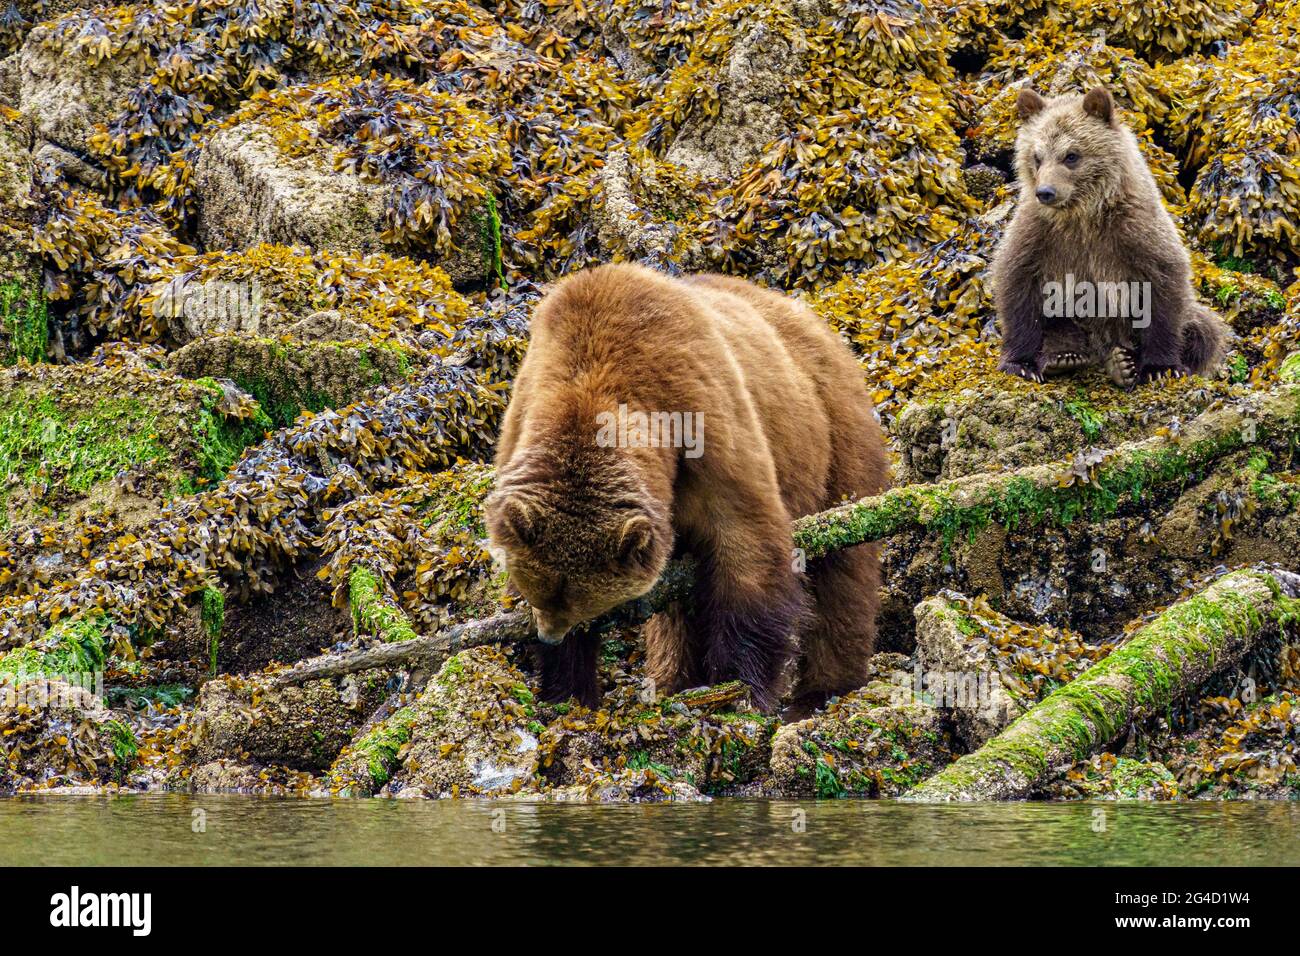 Fresh grizzly cub ( about 4 month old) learning from its mom feeding behaviour during low tide, Knight Inlet, First Nations Territory, British Columbi Stock Photo